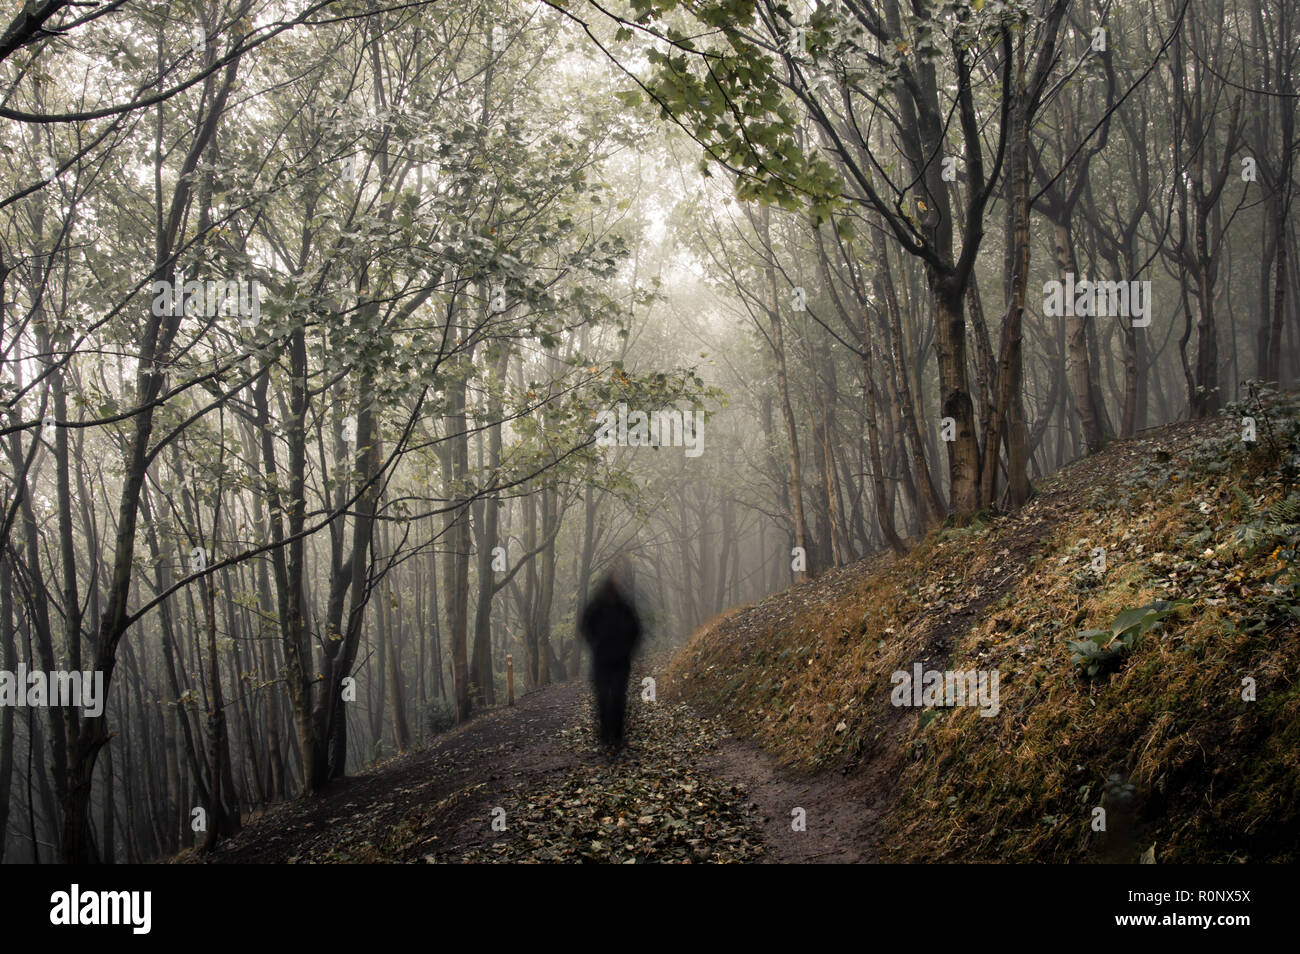 A ghostly figure walking in a misty, winter forest, with a vintage muted edit Stock Photo